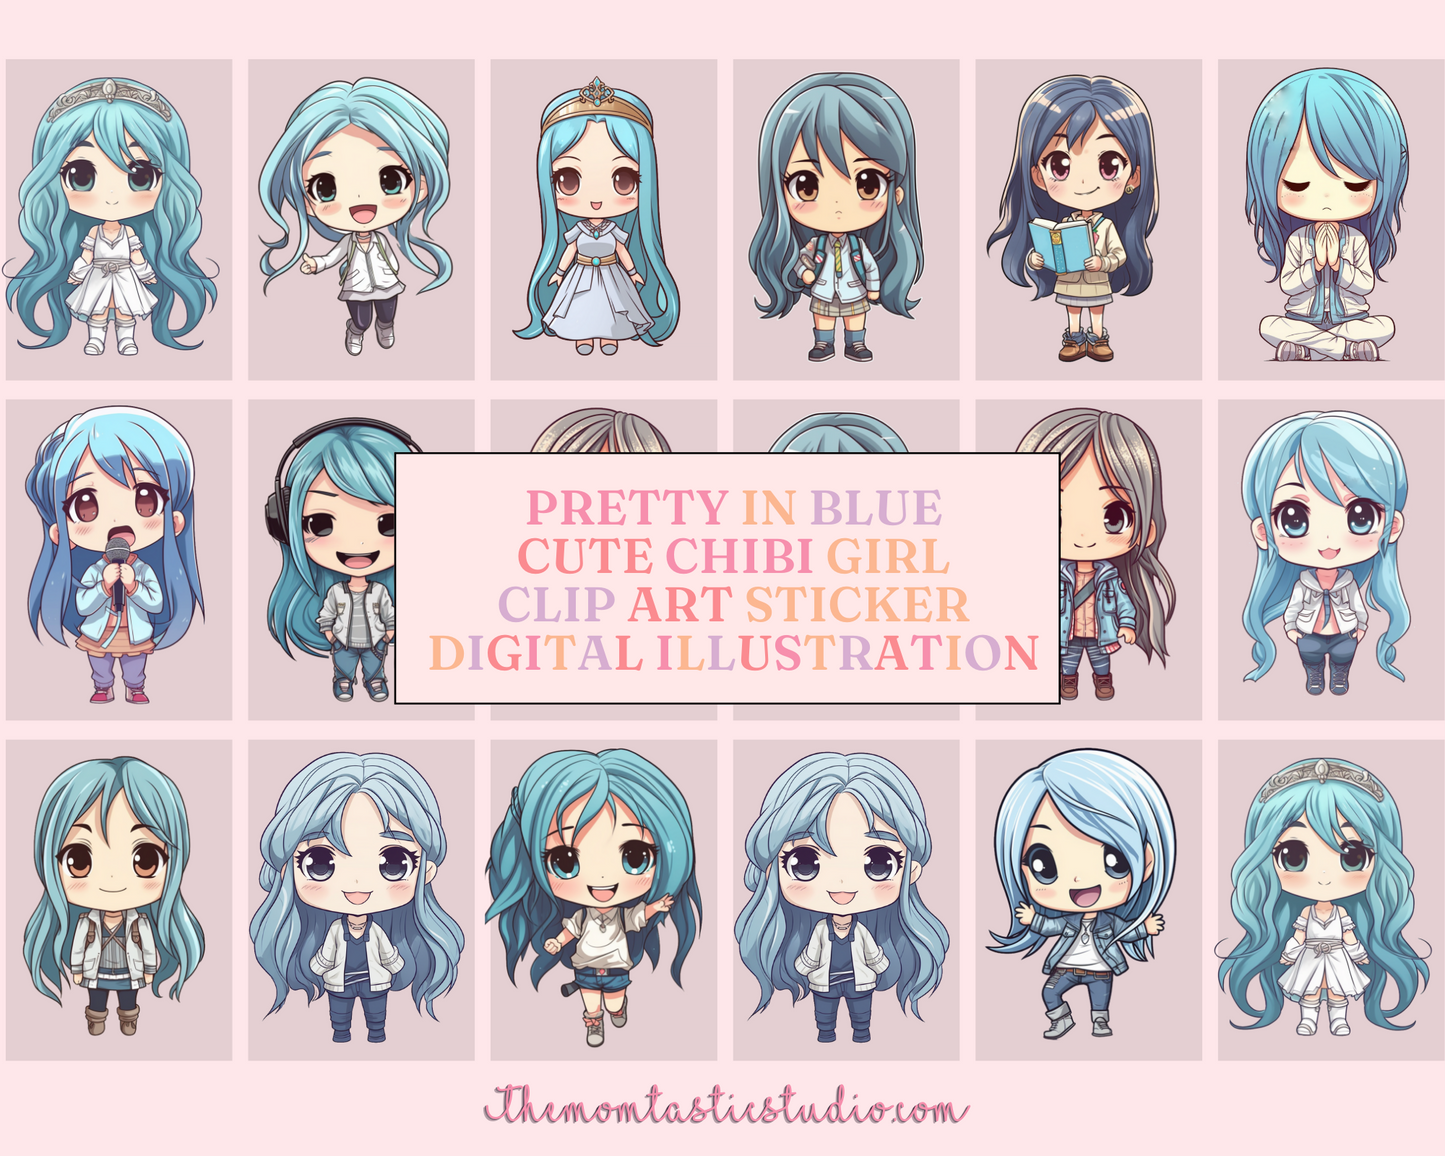 Pretty Series Chibi Girls Stickers Clipart Collection – Printable – Instant Download – High-Quality PNG - Transparent Background - Commercial Use